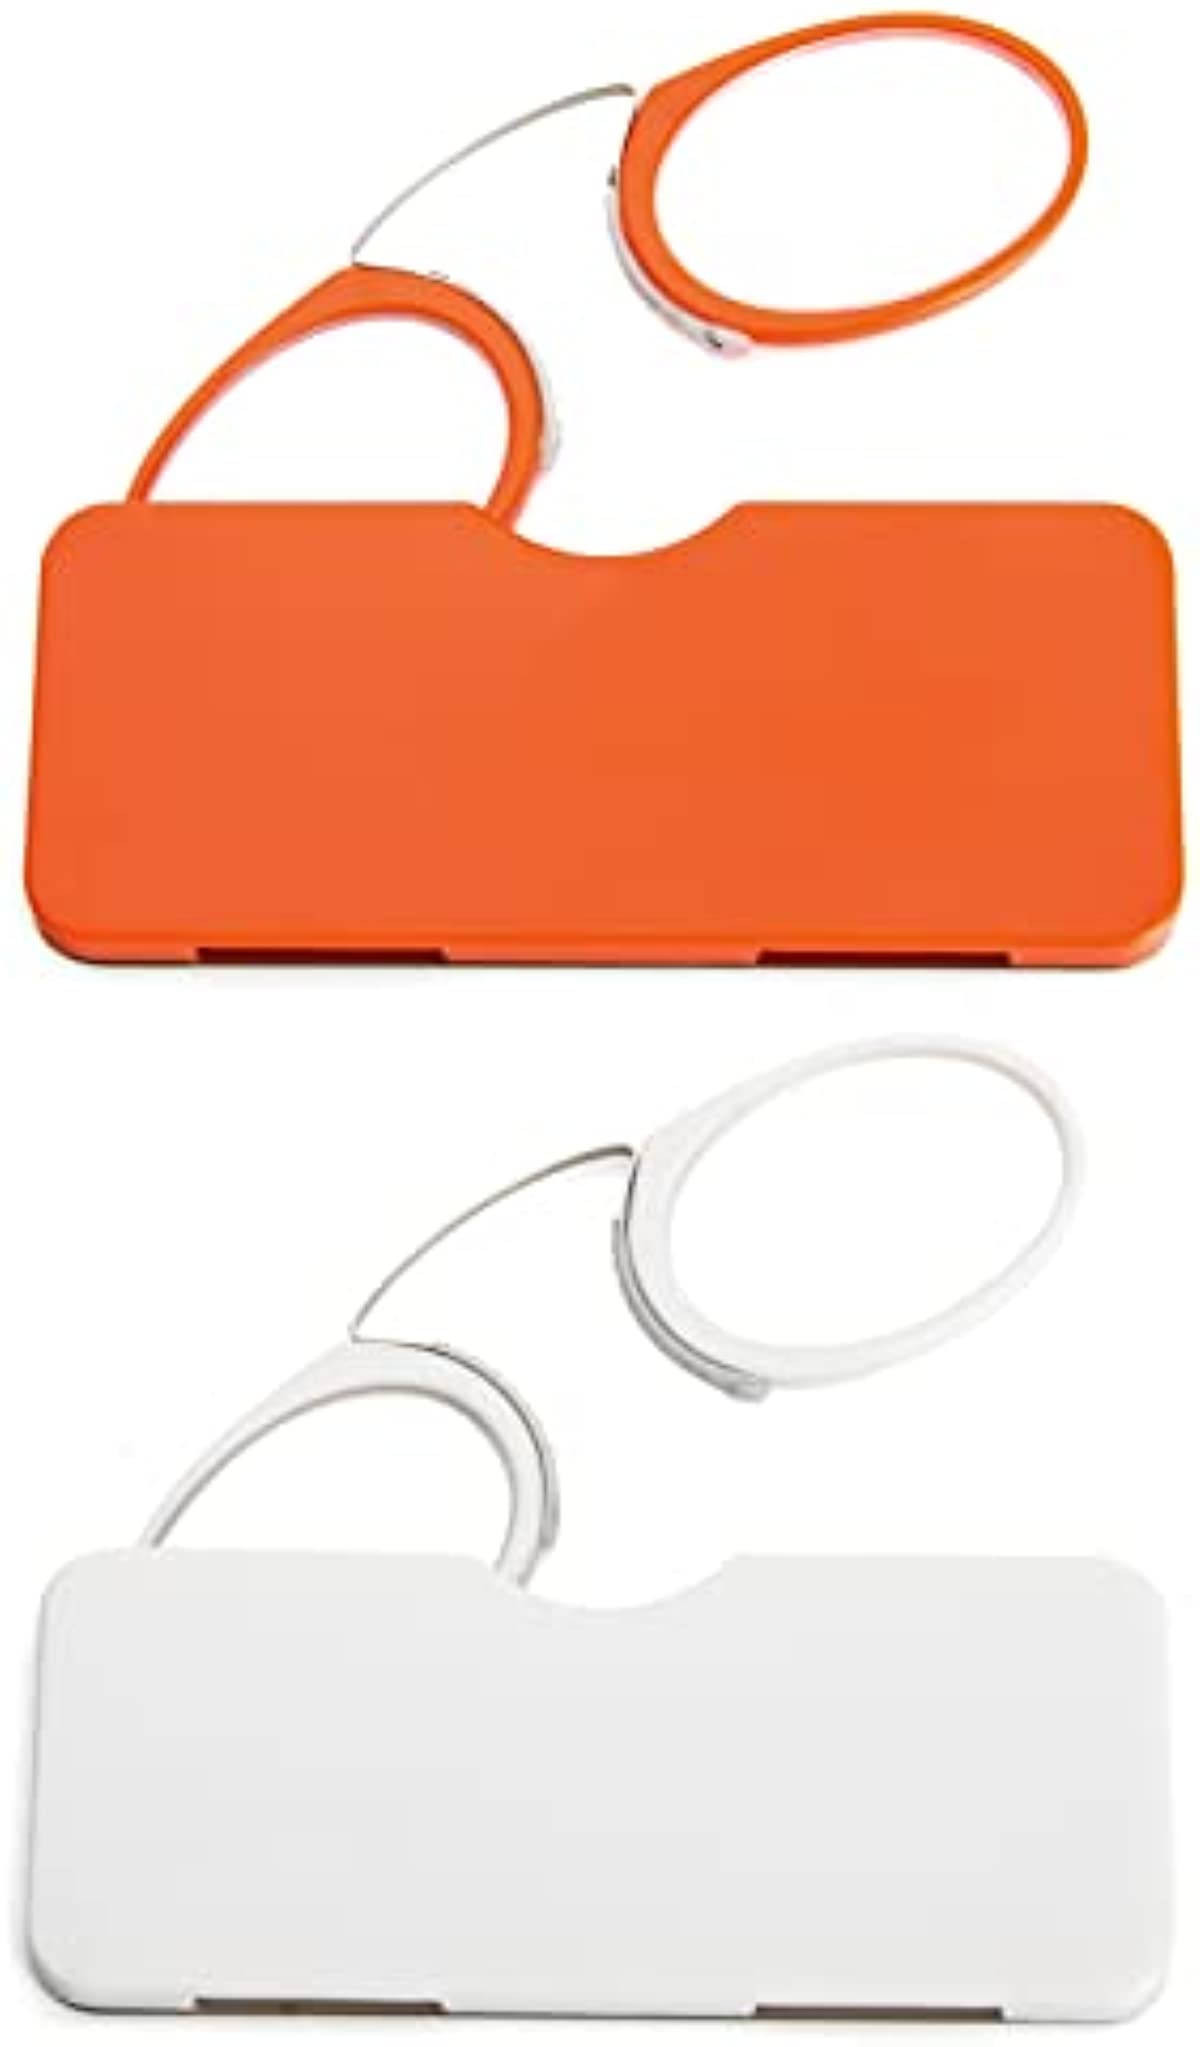 DXYXYO Mini Armless Reading Glasses Clip on Nose for Men Women 2 Pack Thin Compact Readers with Small Portable Case